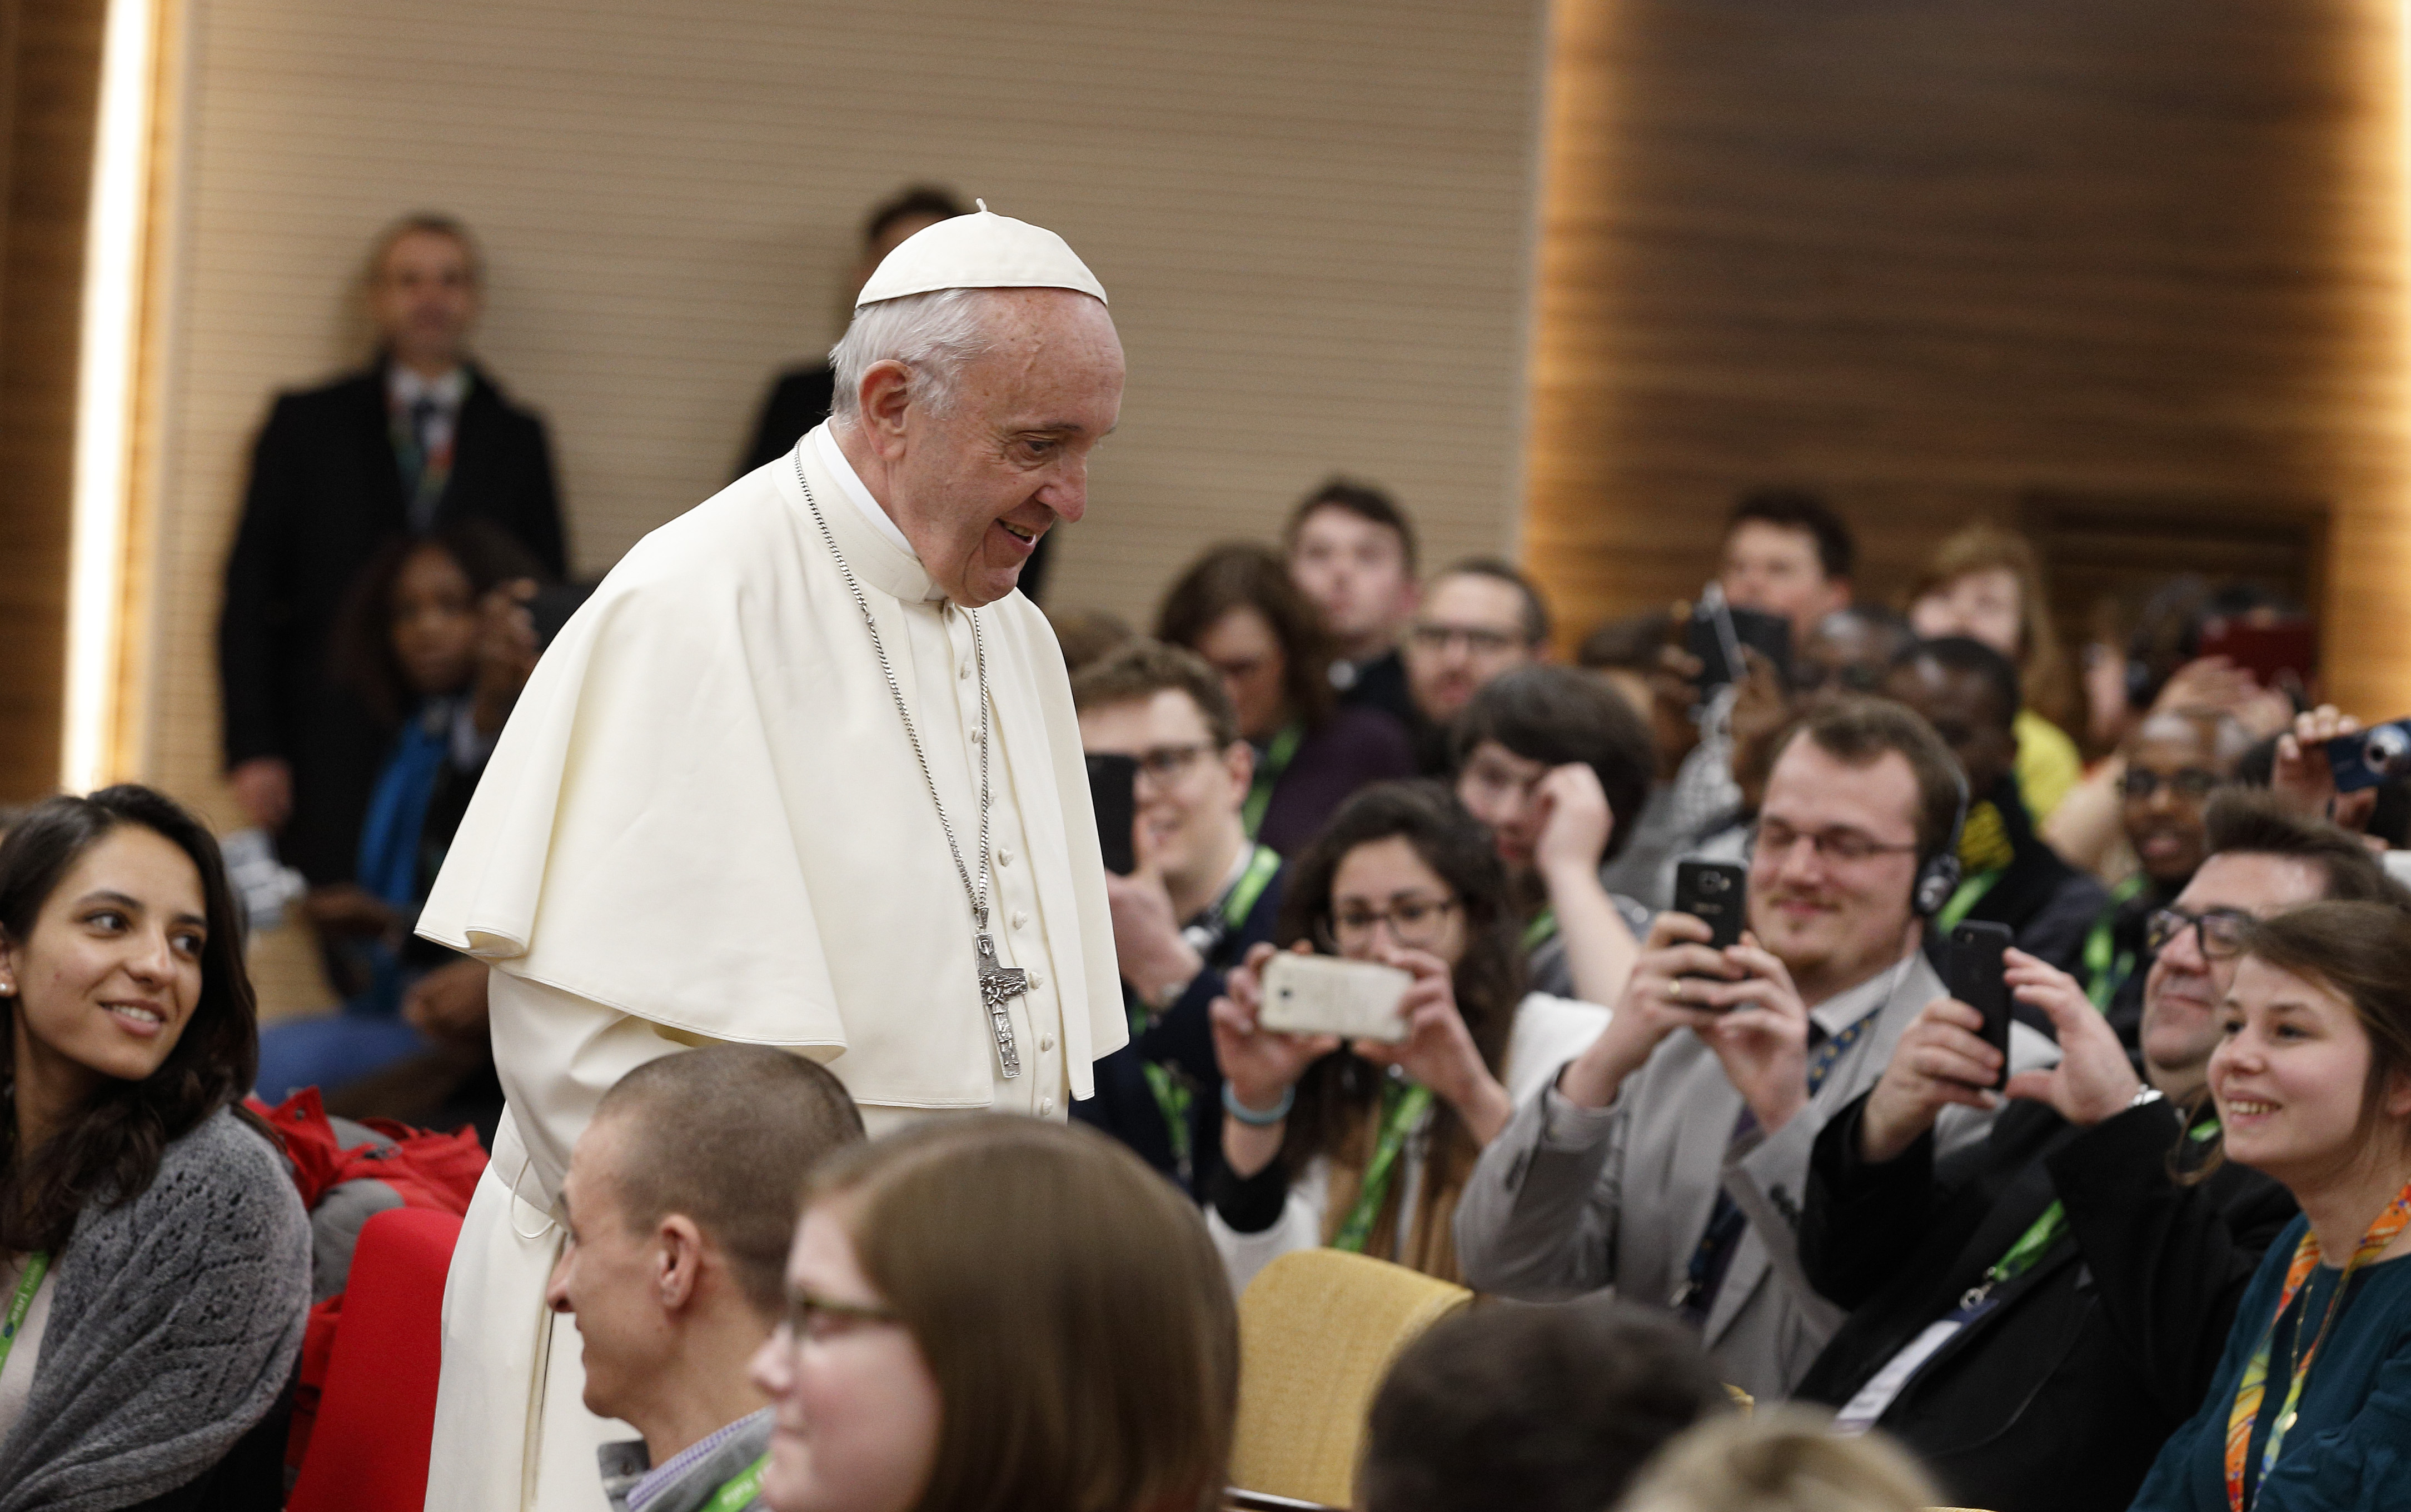 Synod working document: Young Catholics need church that listens to them